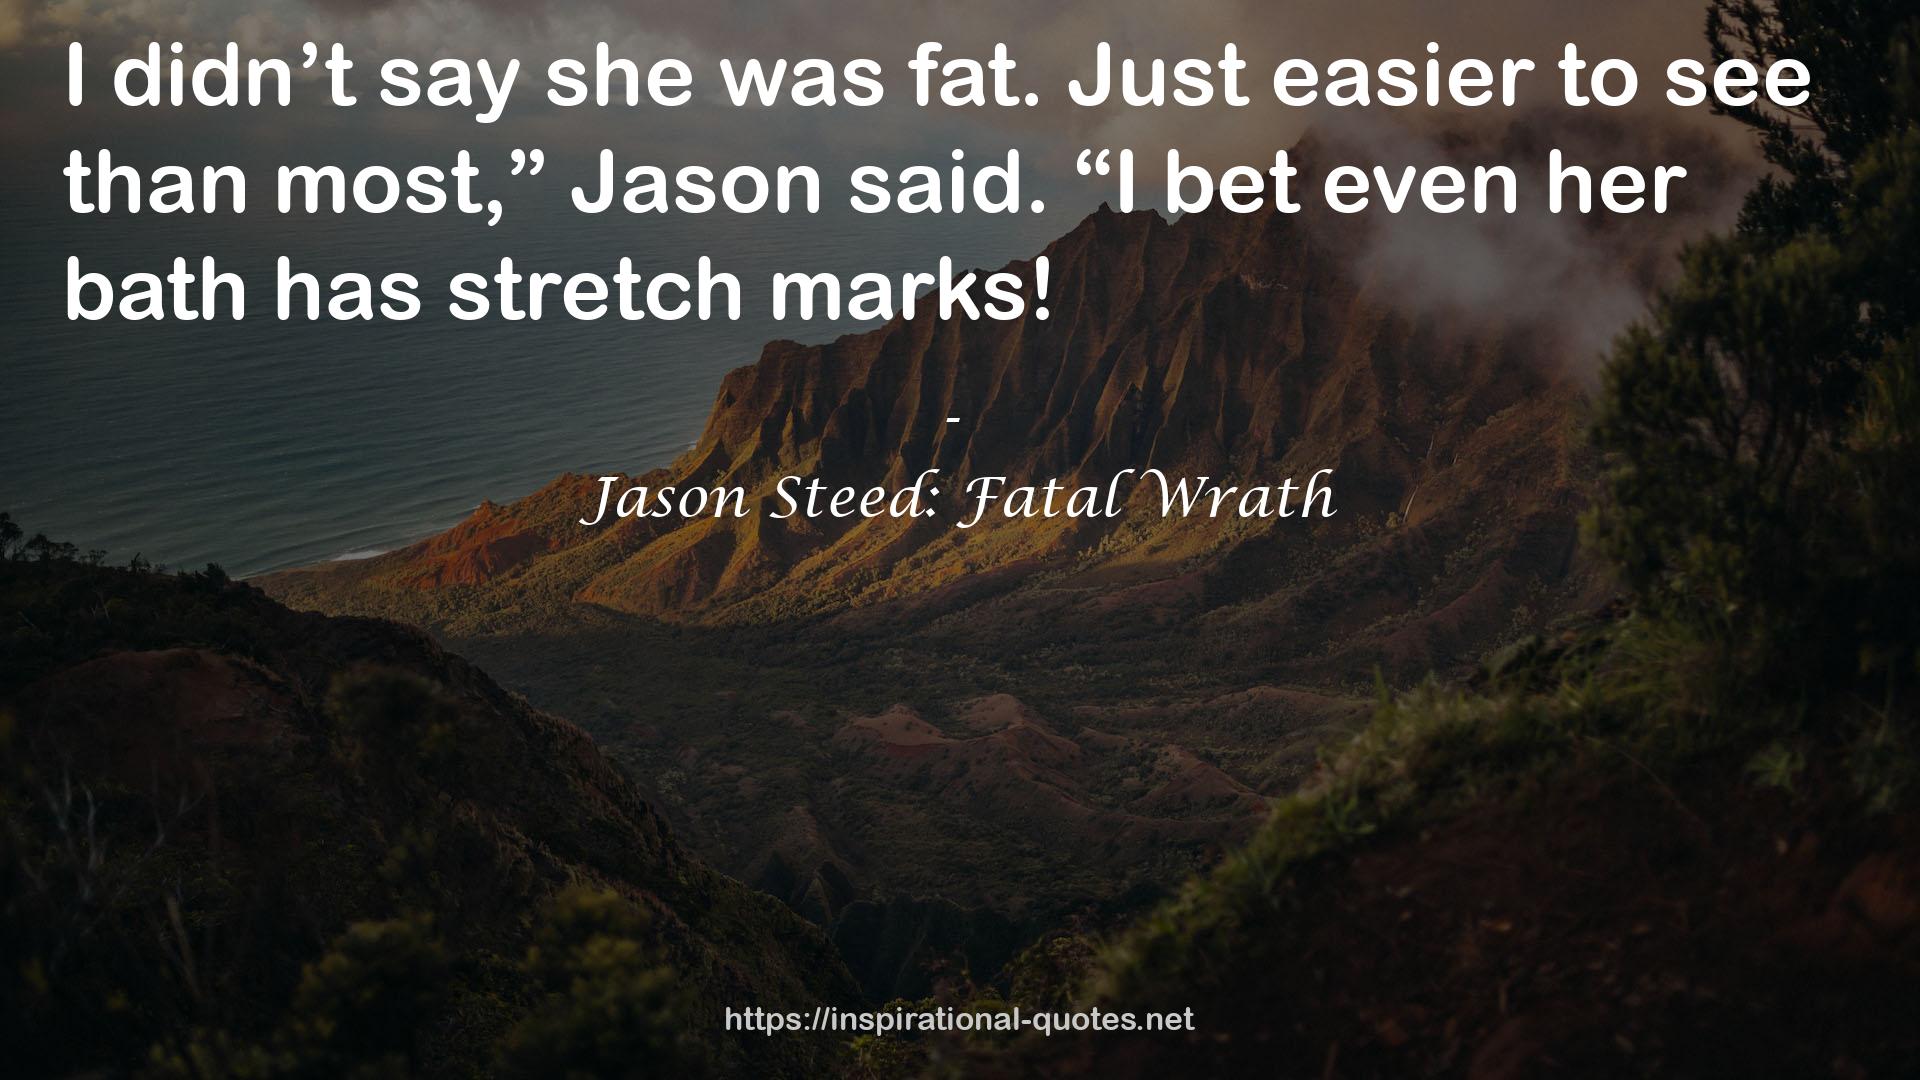 Jason Steed: Fatal Wrath QUOTES